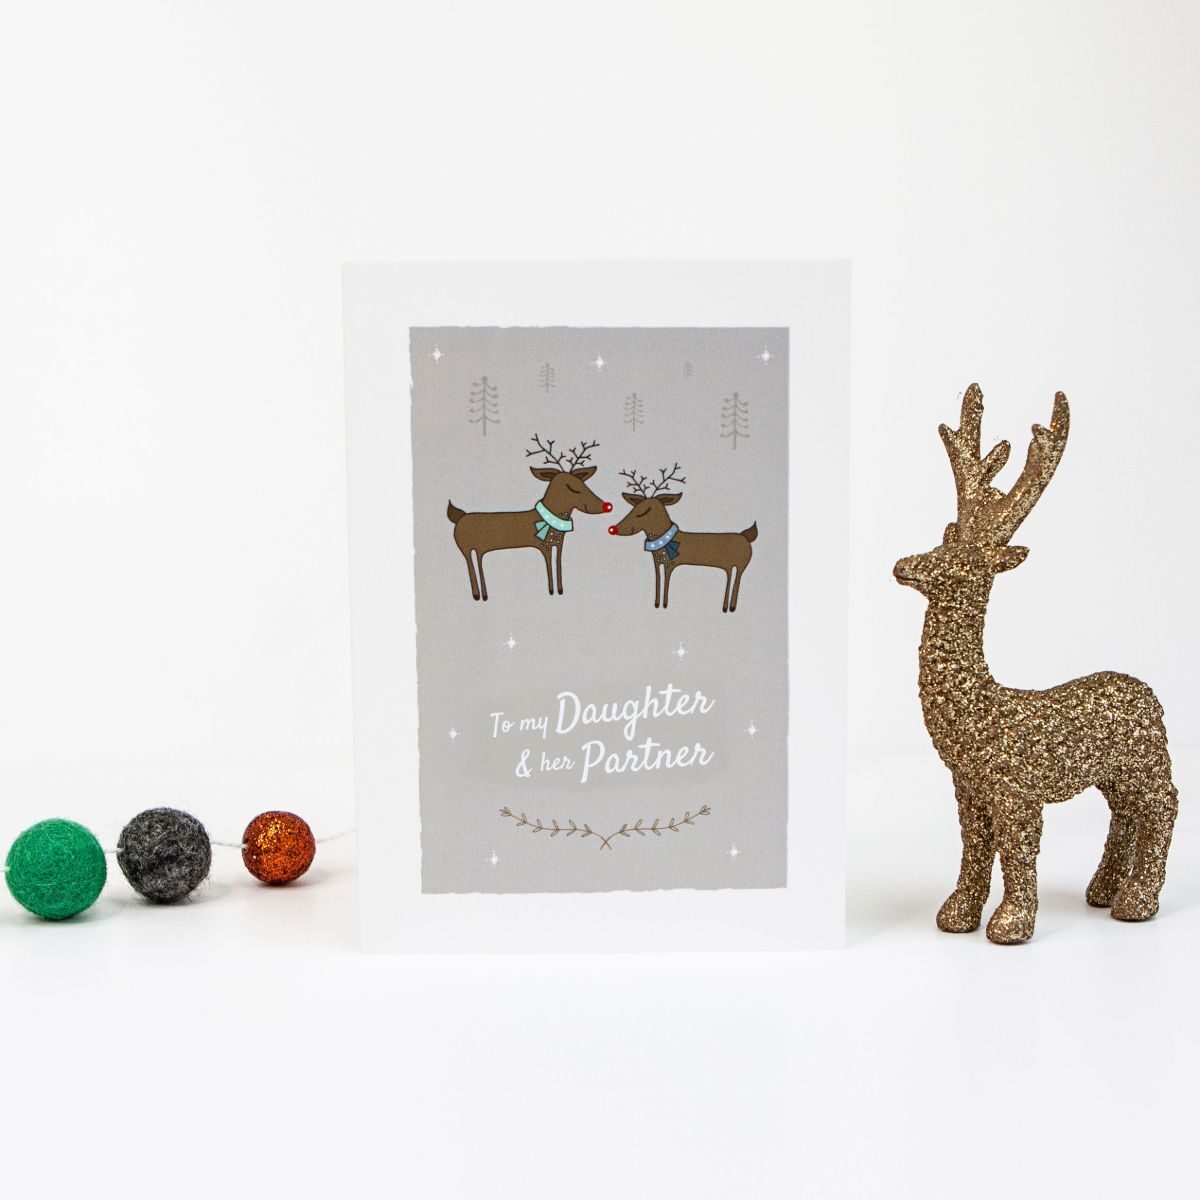 To my Daughter and her Partner Christmas Day Card